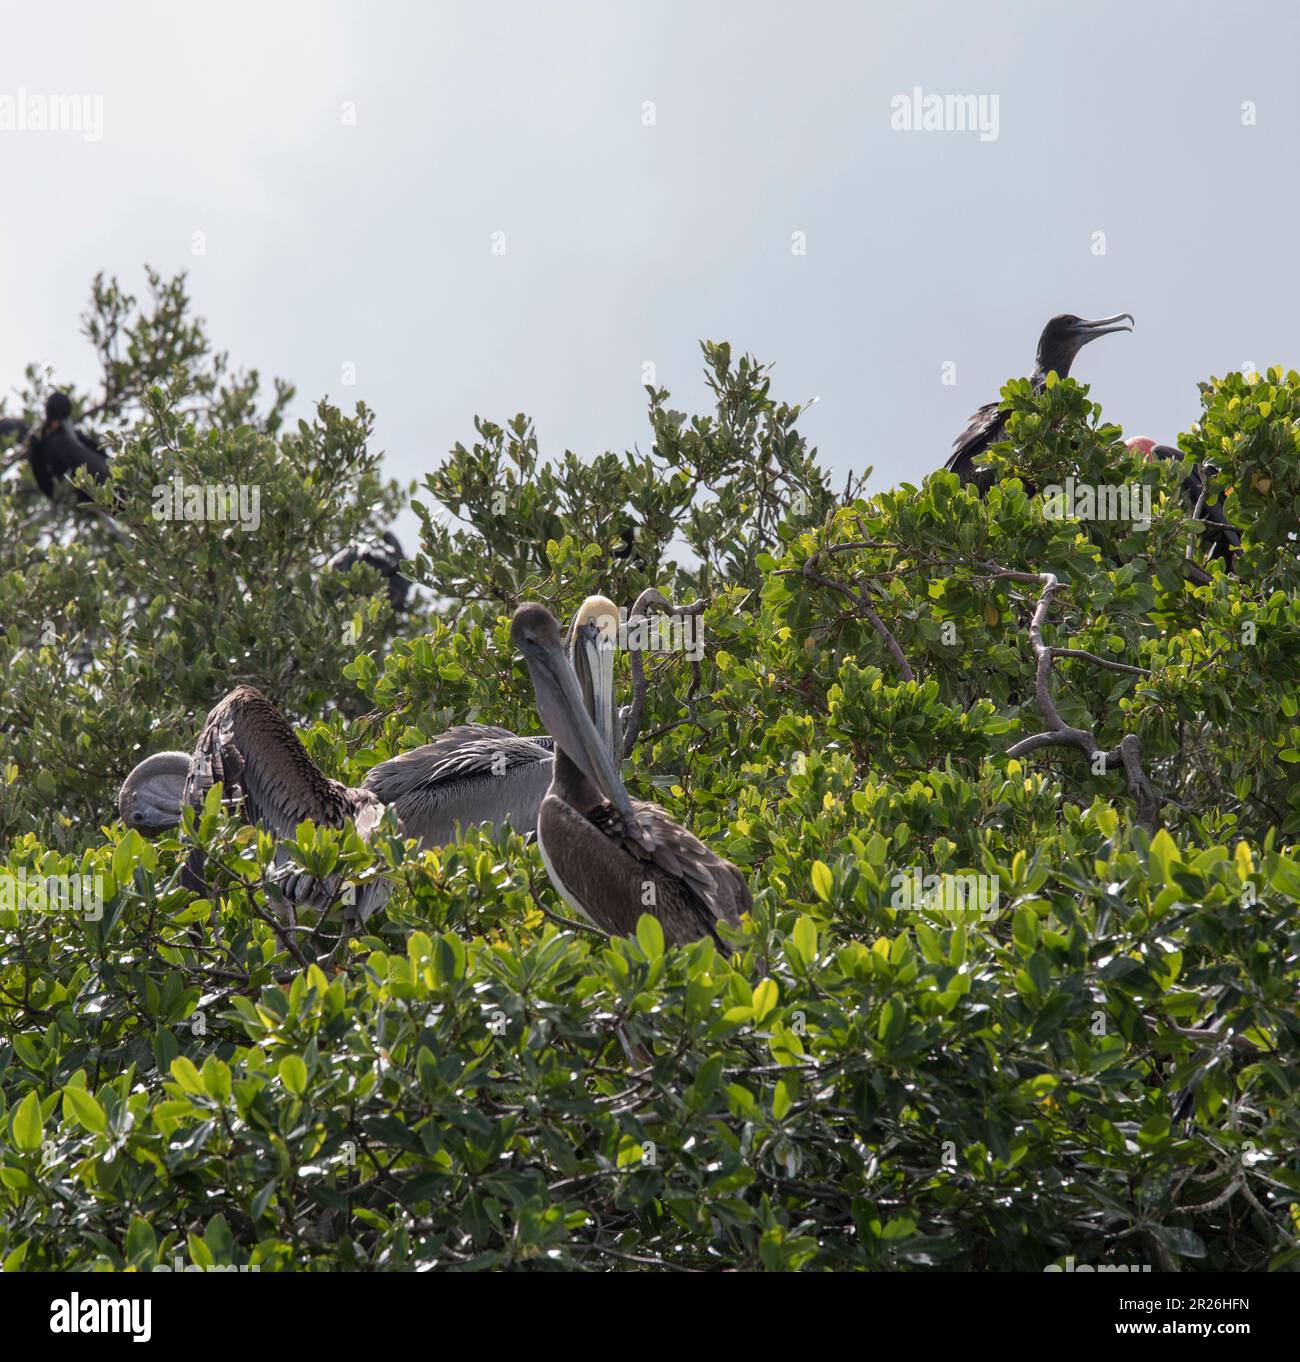 View of tree with brown pelican birds, Mexico Stock Photo